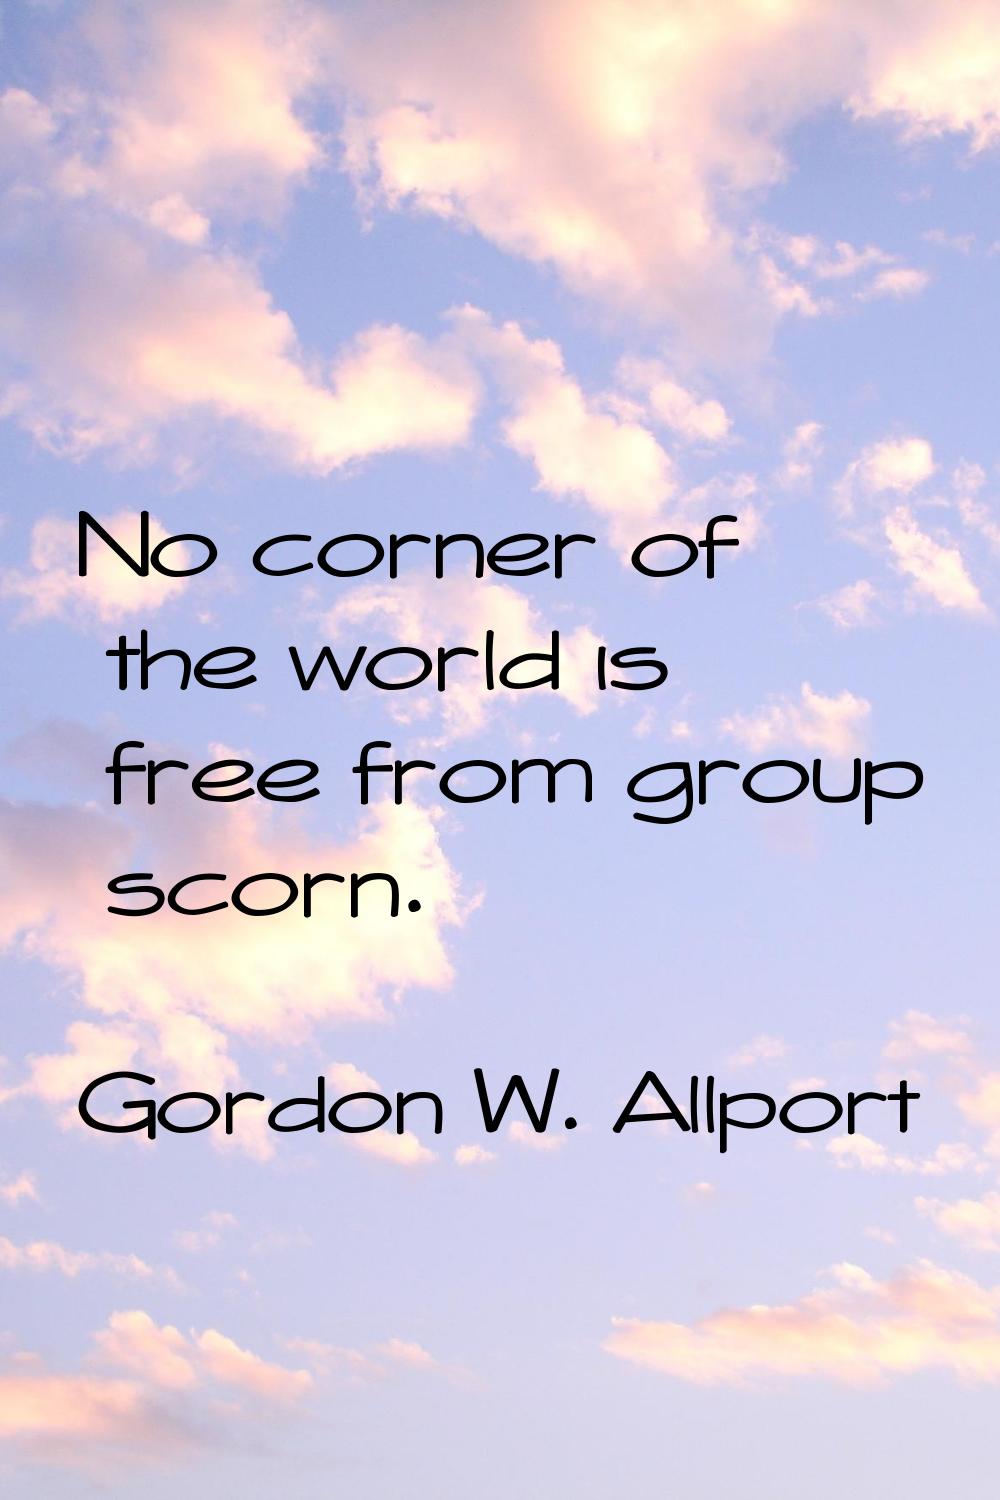 No corner of the world is free from group scorn.